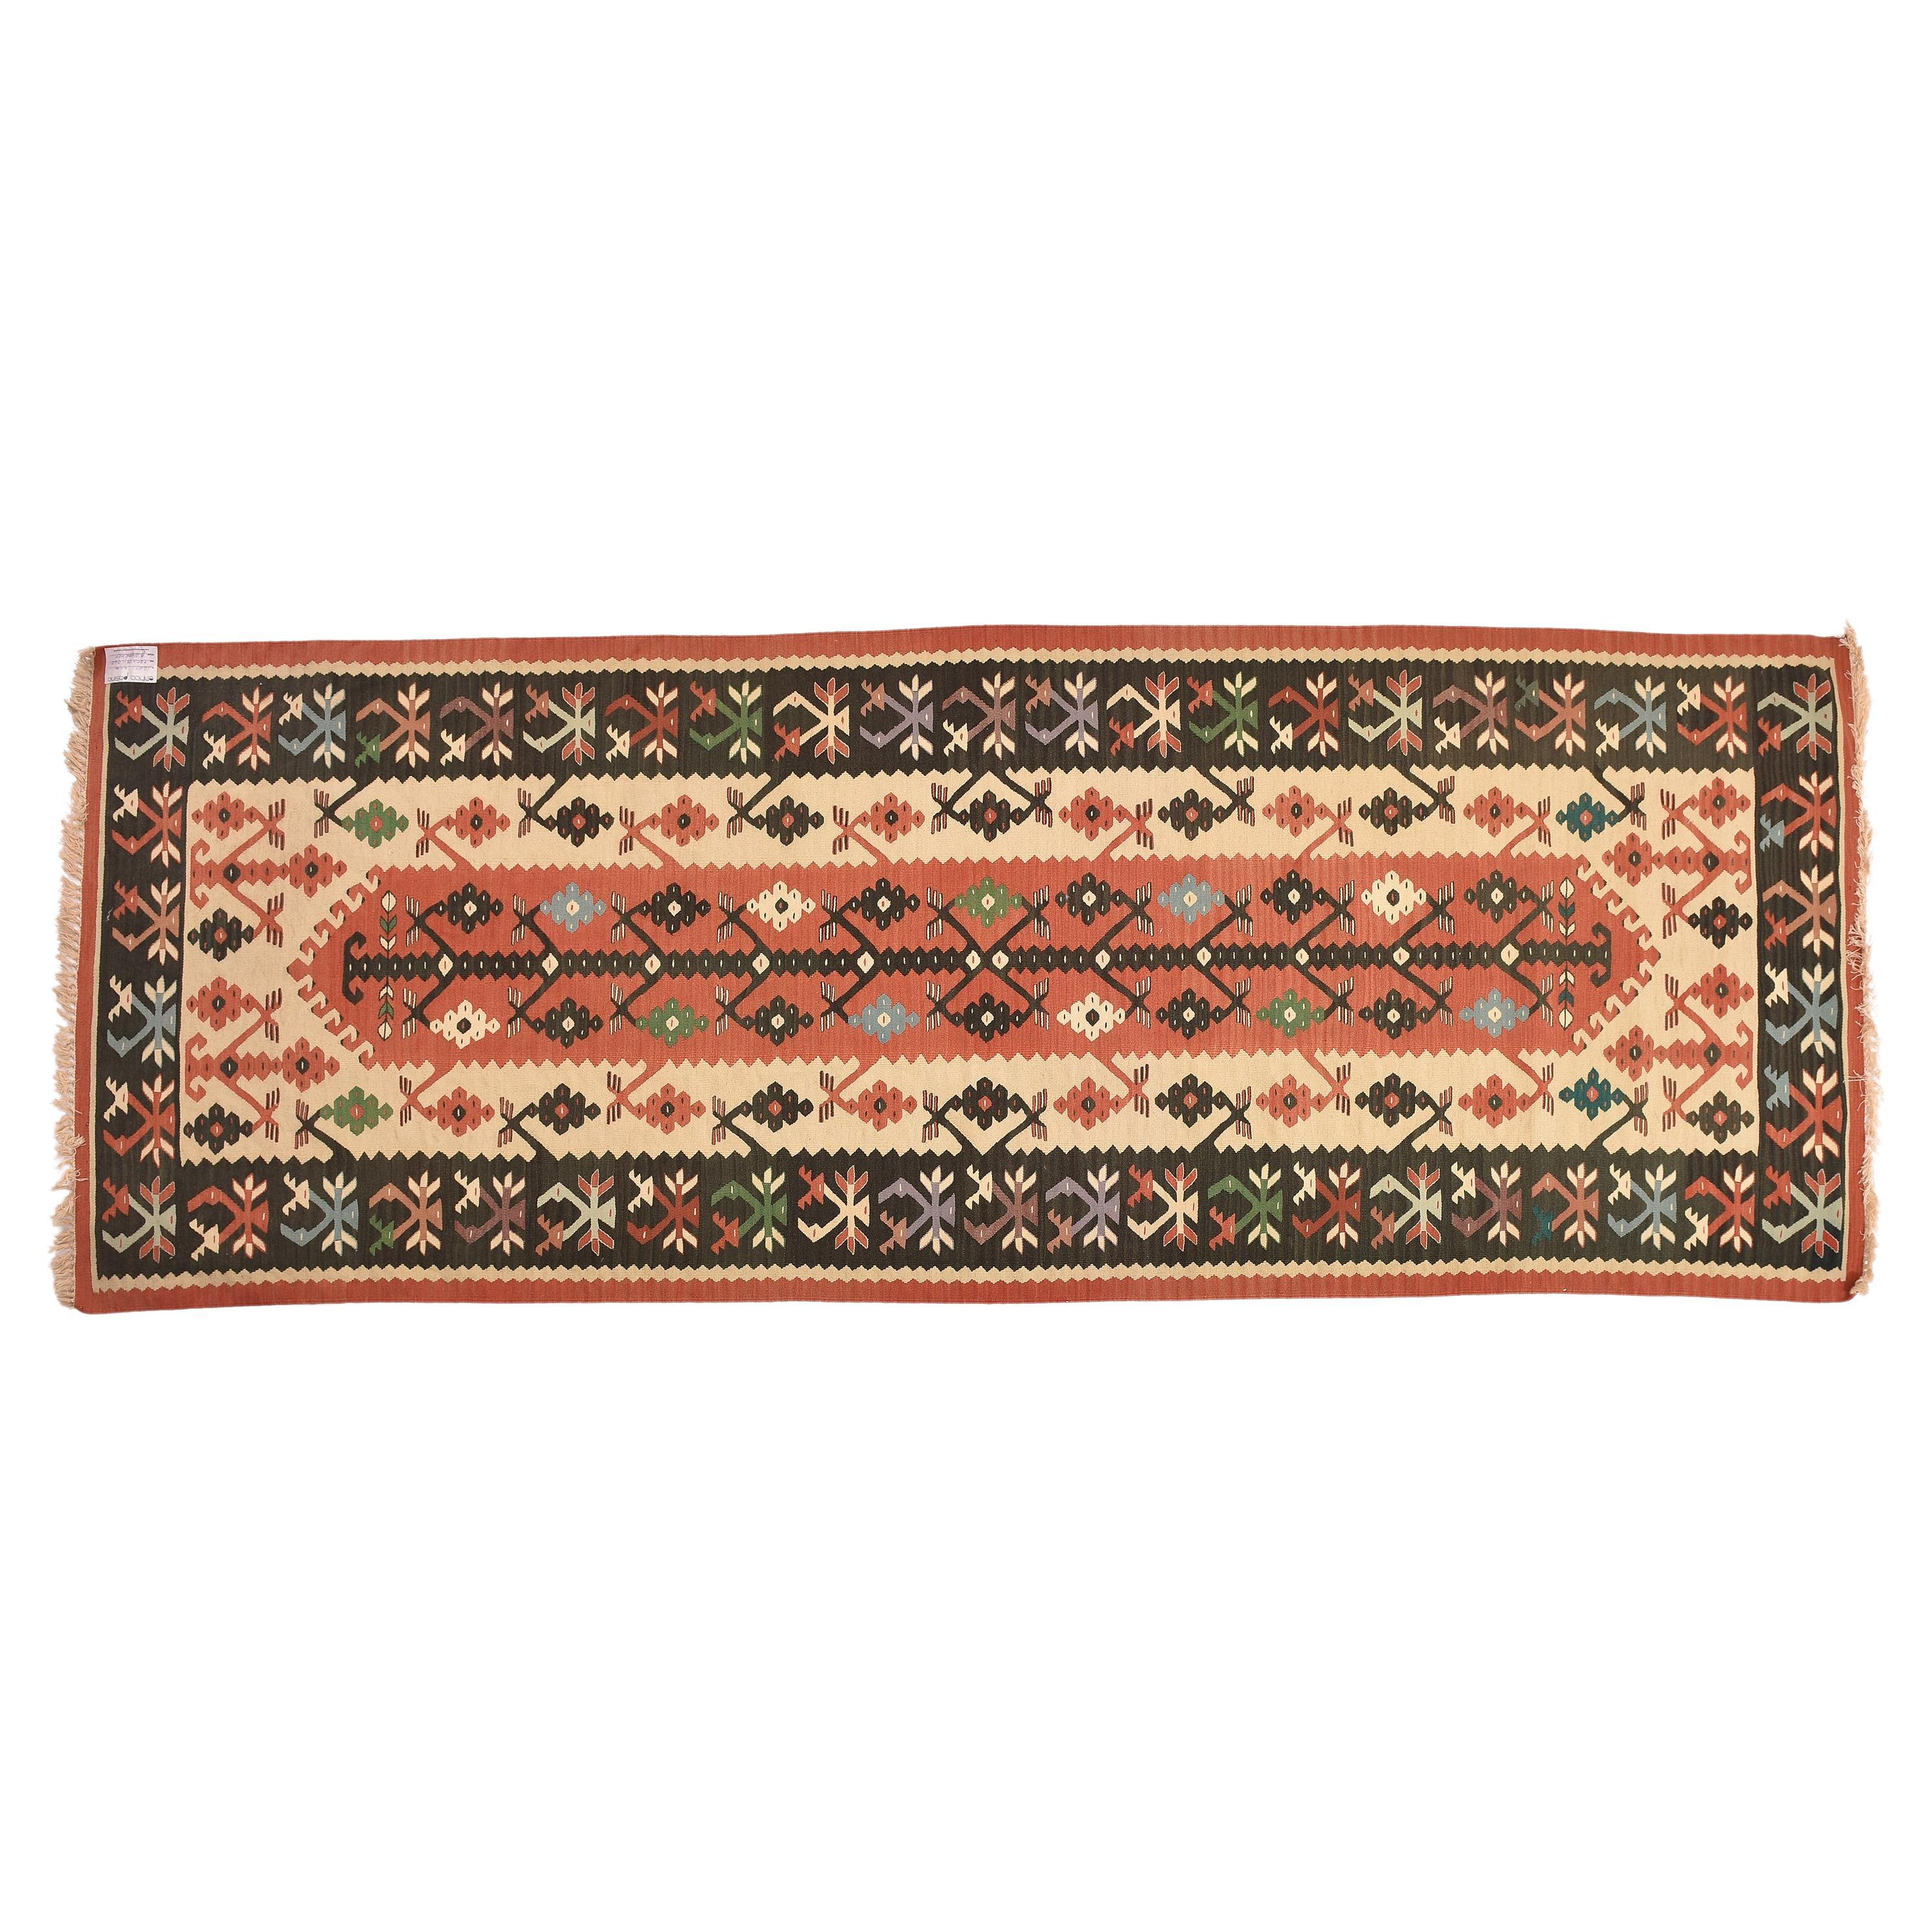 nr. 663 - Simple elegant kilim runner, with excellent weaving workmanship, easy to match with other carpets.
Good price for closing activities.